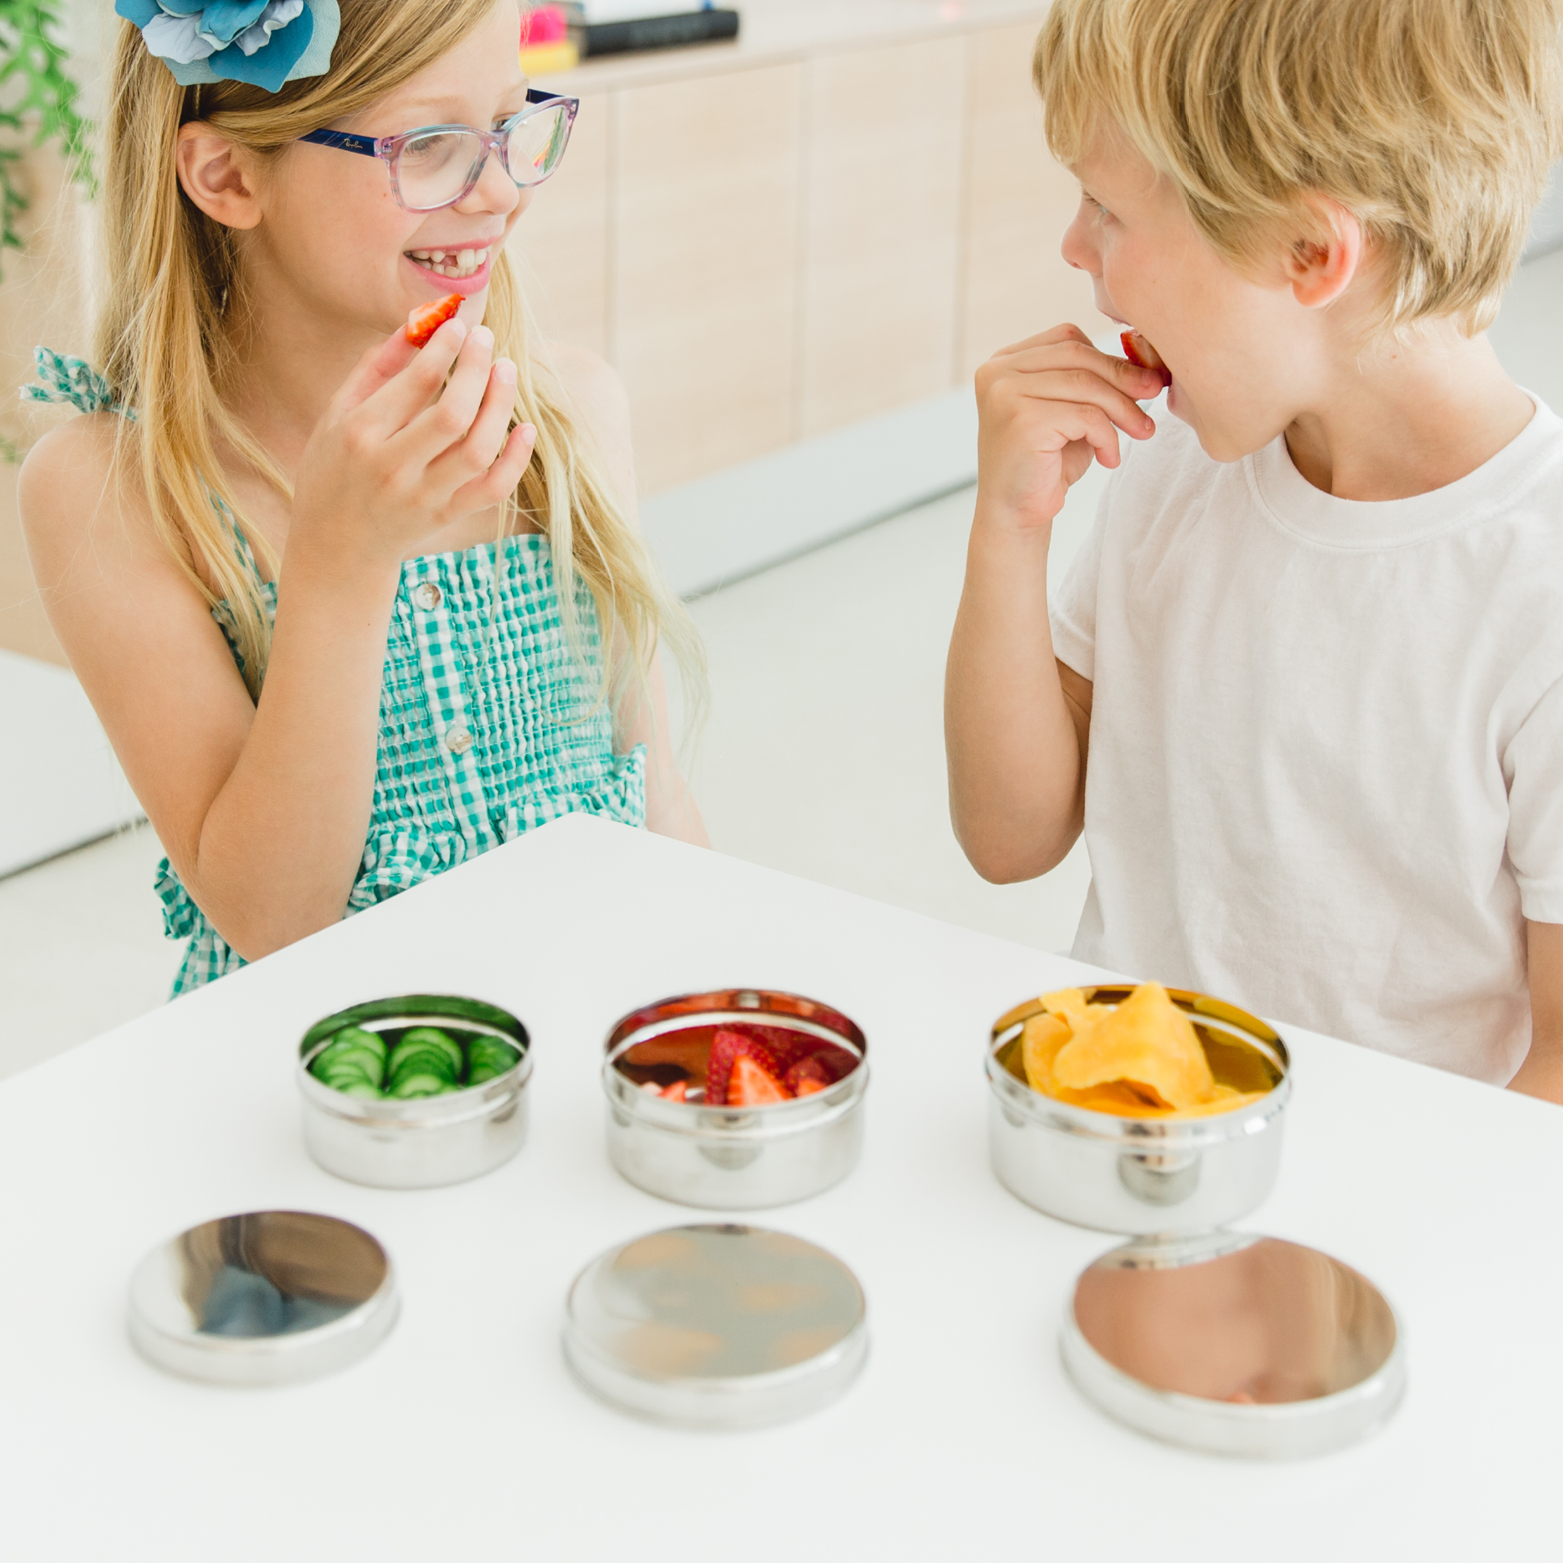 The Circle Trio in Classic from Ahimsa's Movable Meal Collection.  Our dishes are tools for creating healthy variety and age-appropriate serving sizes. Plus, our pediatricians provide tips and tools for healthy eating in our mealtime guides.